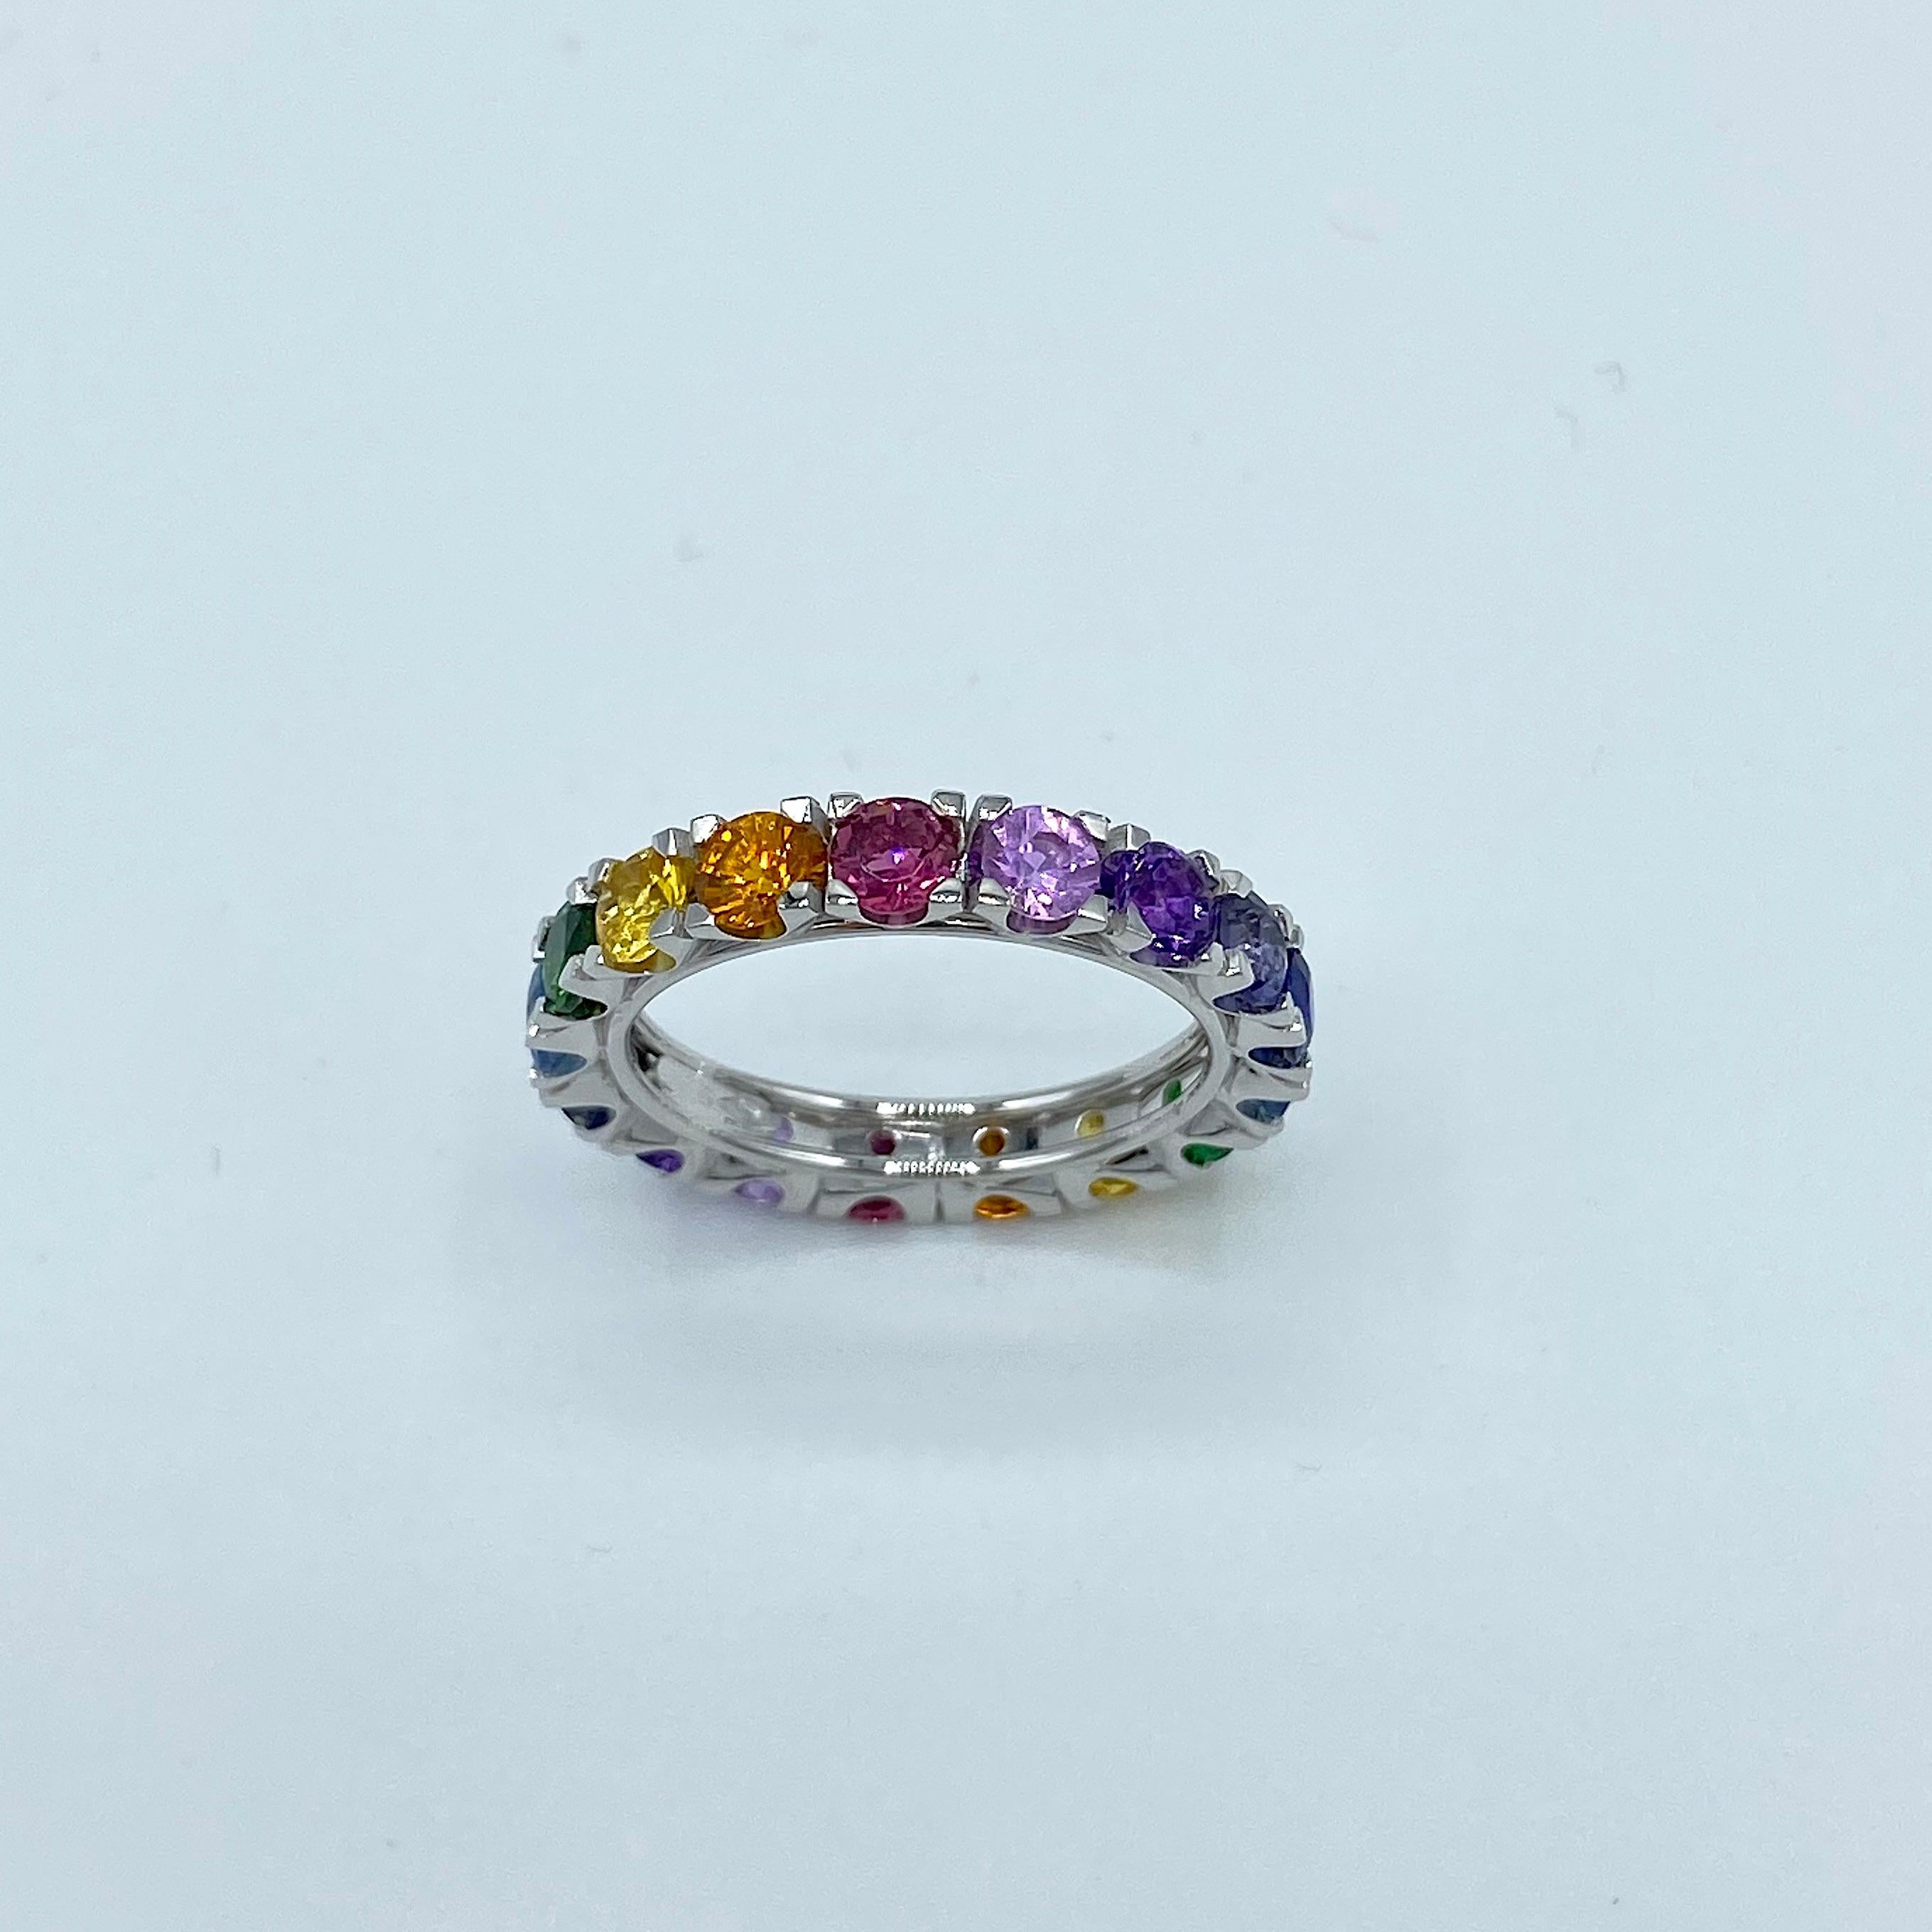  Rainbow Sapphire Semiprecious Stone 18 Karat White Gold Ring Made in Italy
This multicolor eternity ring is set from 17 stones. It has yellow, orange, violet and blue sapphire; tourmaline, iolite, aquamarine, amethyst and tzavorite. 
I put the